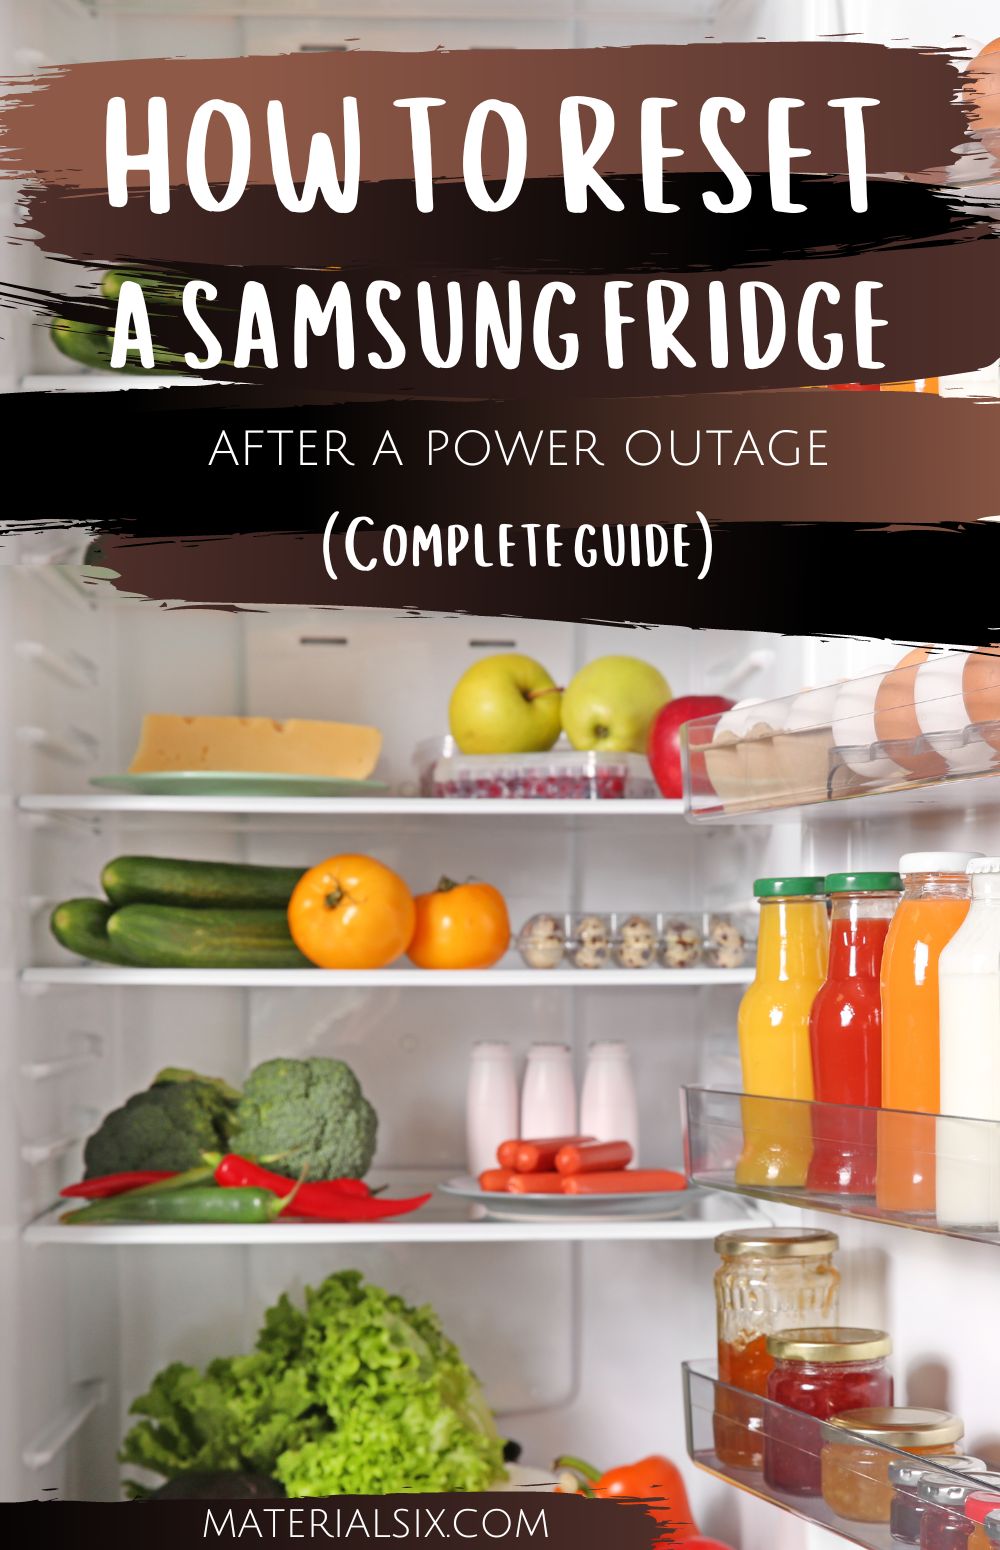 How to Reset a Samsung Fridge after a Power Outage